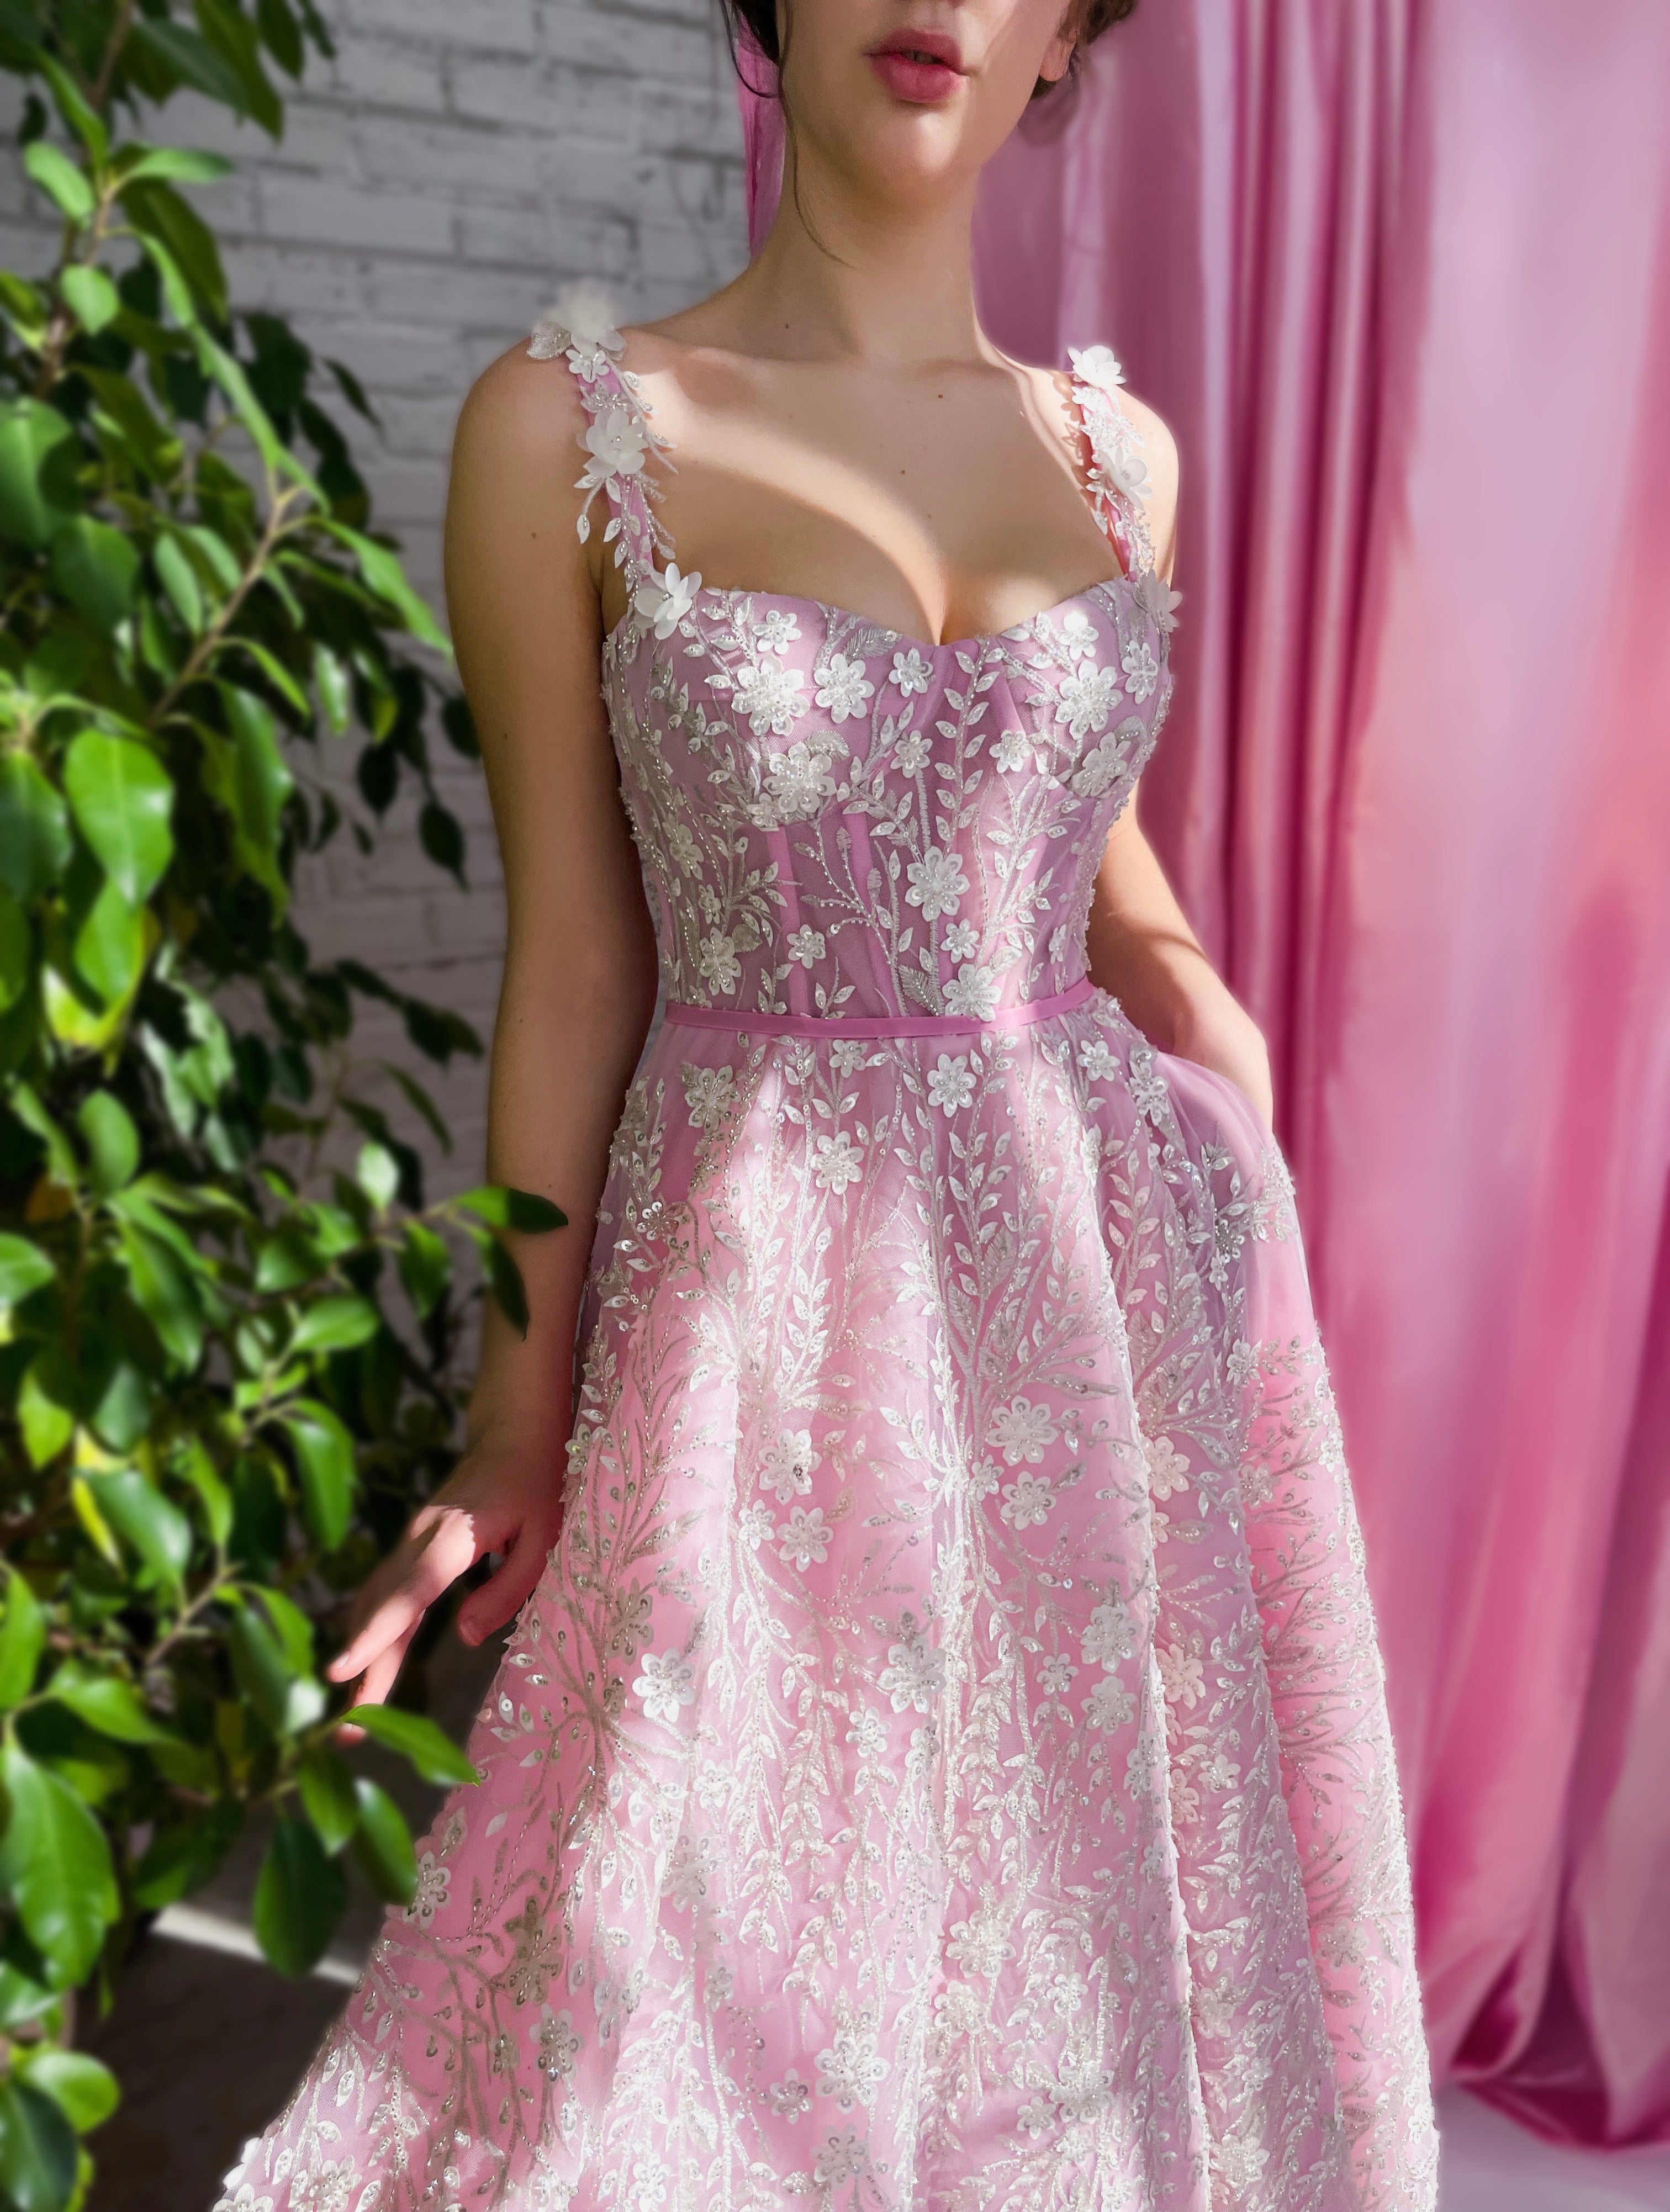 Pink midi dress with spaghetti straps, embroidery and lace